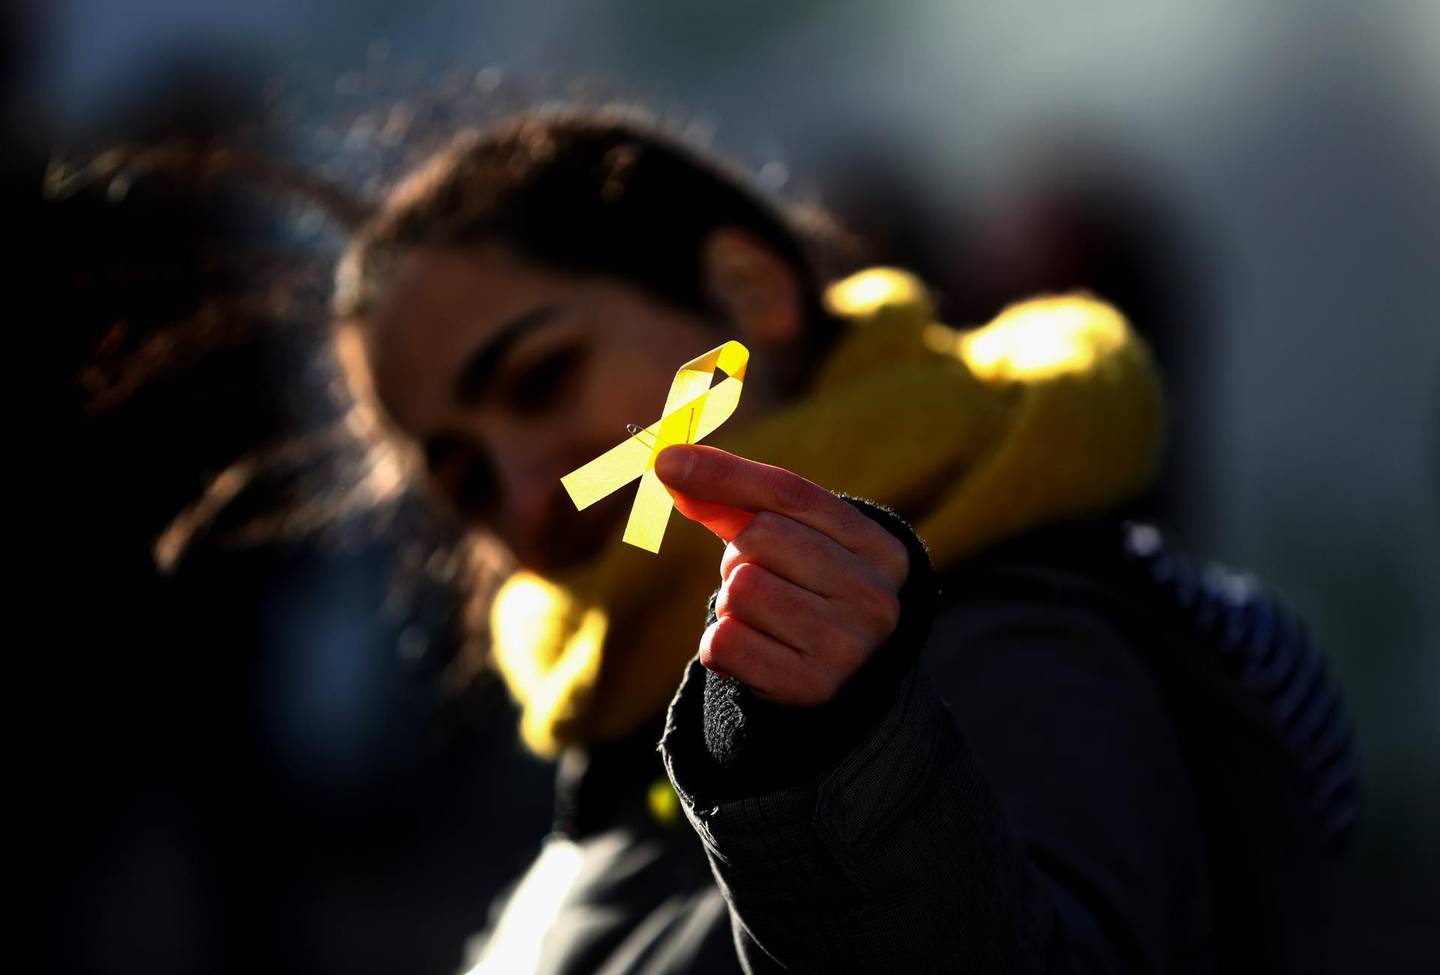 LONDON, ENGLAND - FEBRUARY 25:  Yellow ribbons in support of in support of Catalan independence are handed out before the Carabao Cup Final between Arsenal and Manchester City at Wembley Stadium on February 25, 2018 in London, England. (Photo by Catherine Ivill/Getty Images)